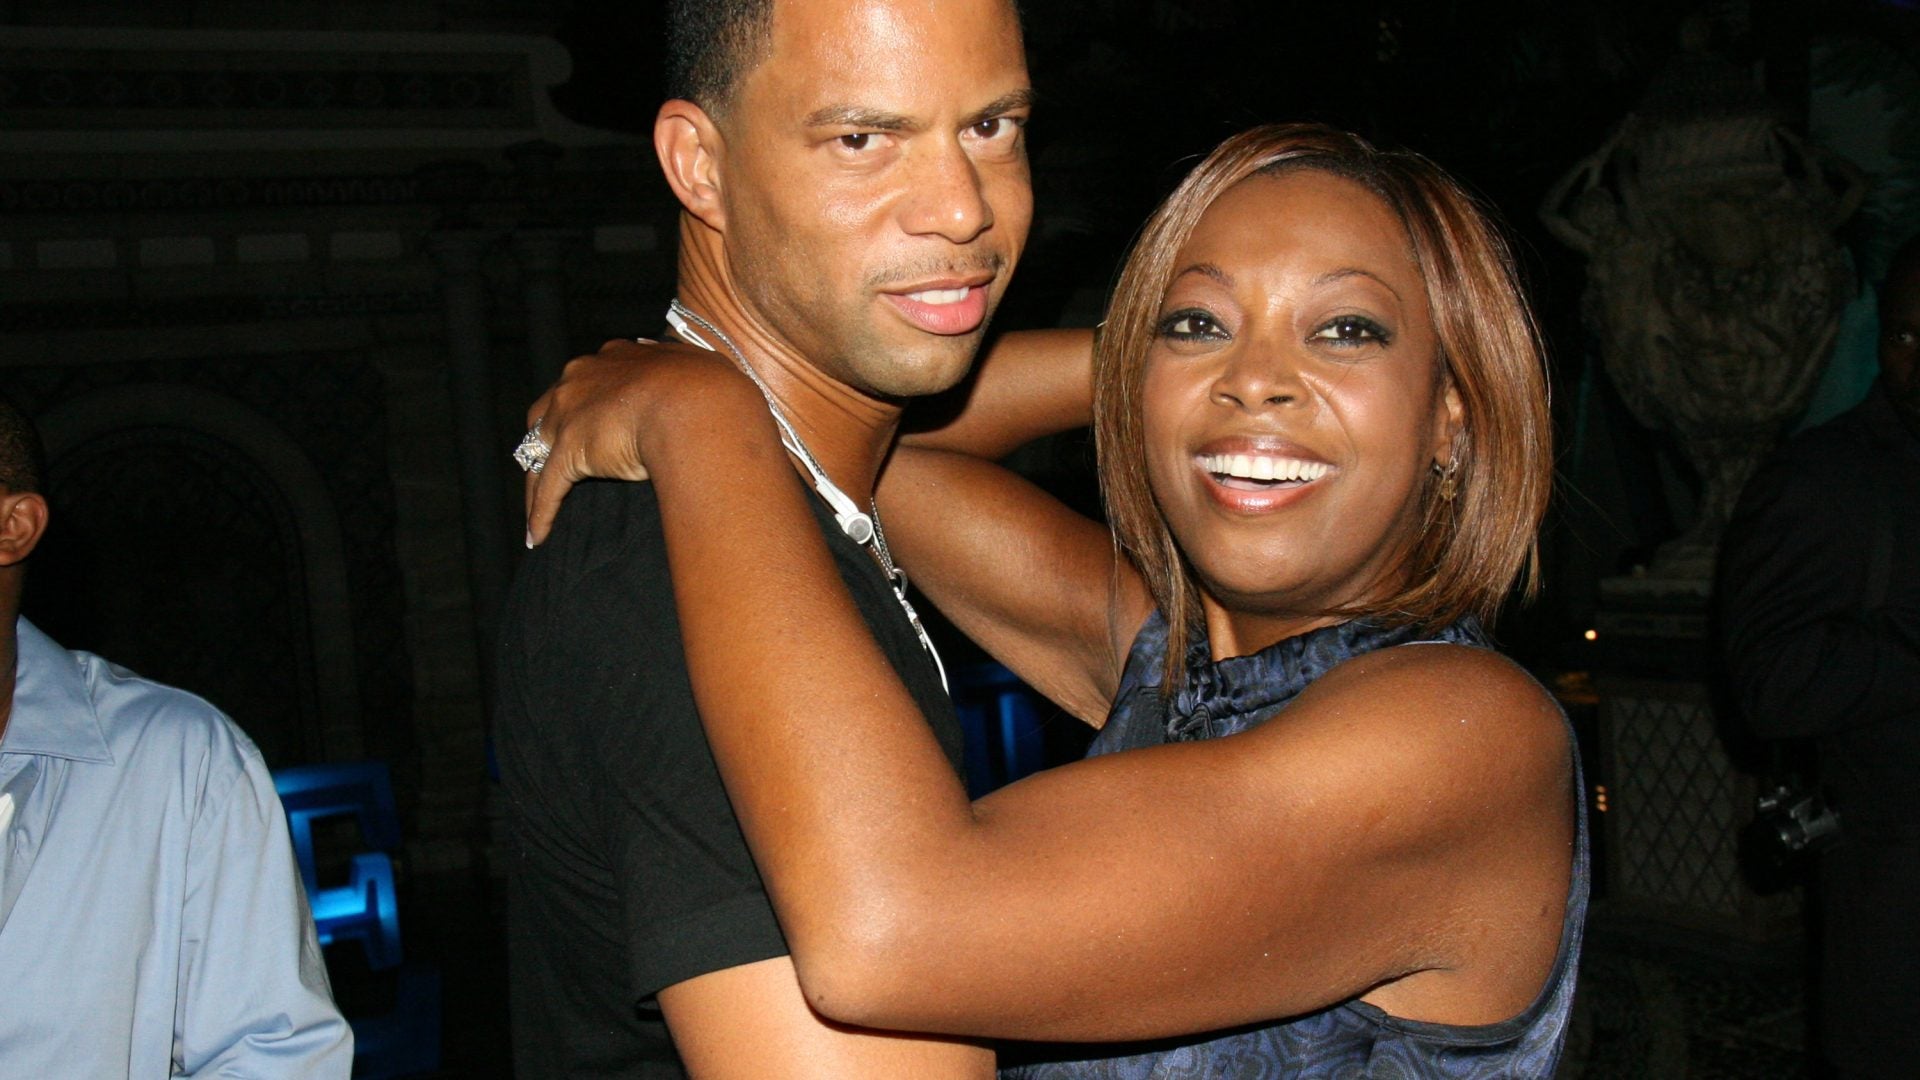 Al Reynolds Says He Was 'Very Honest' About His Sexuality When Dating Star Jones